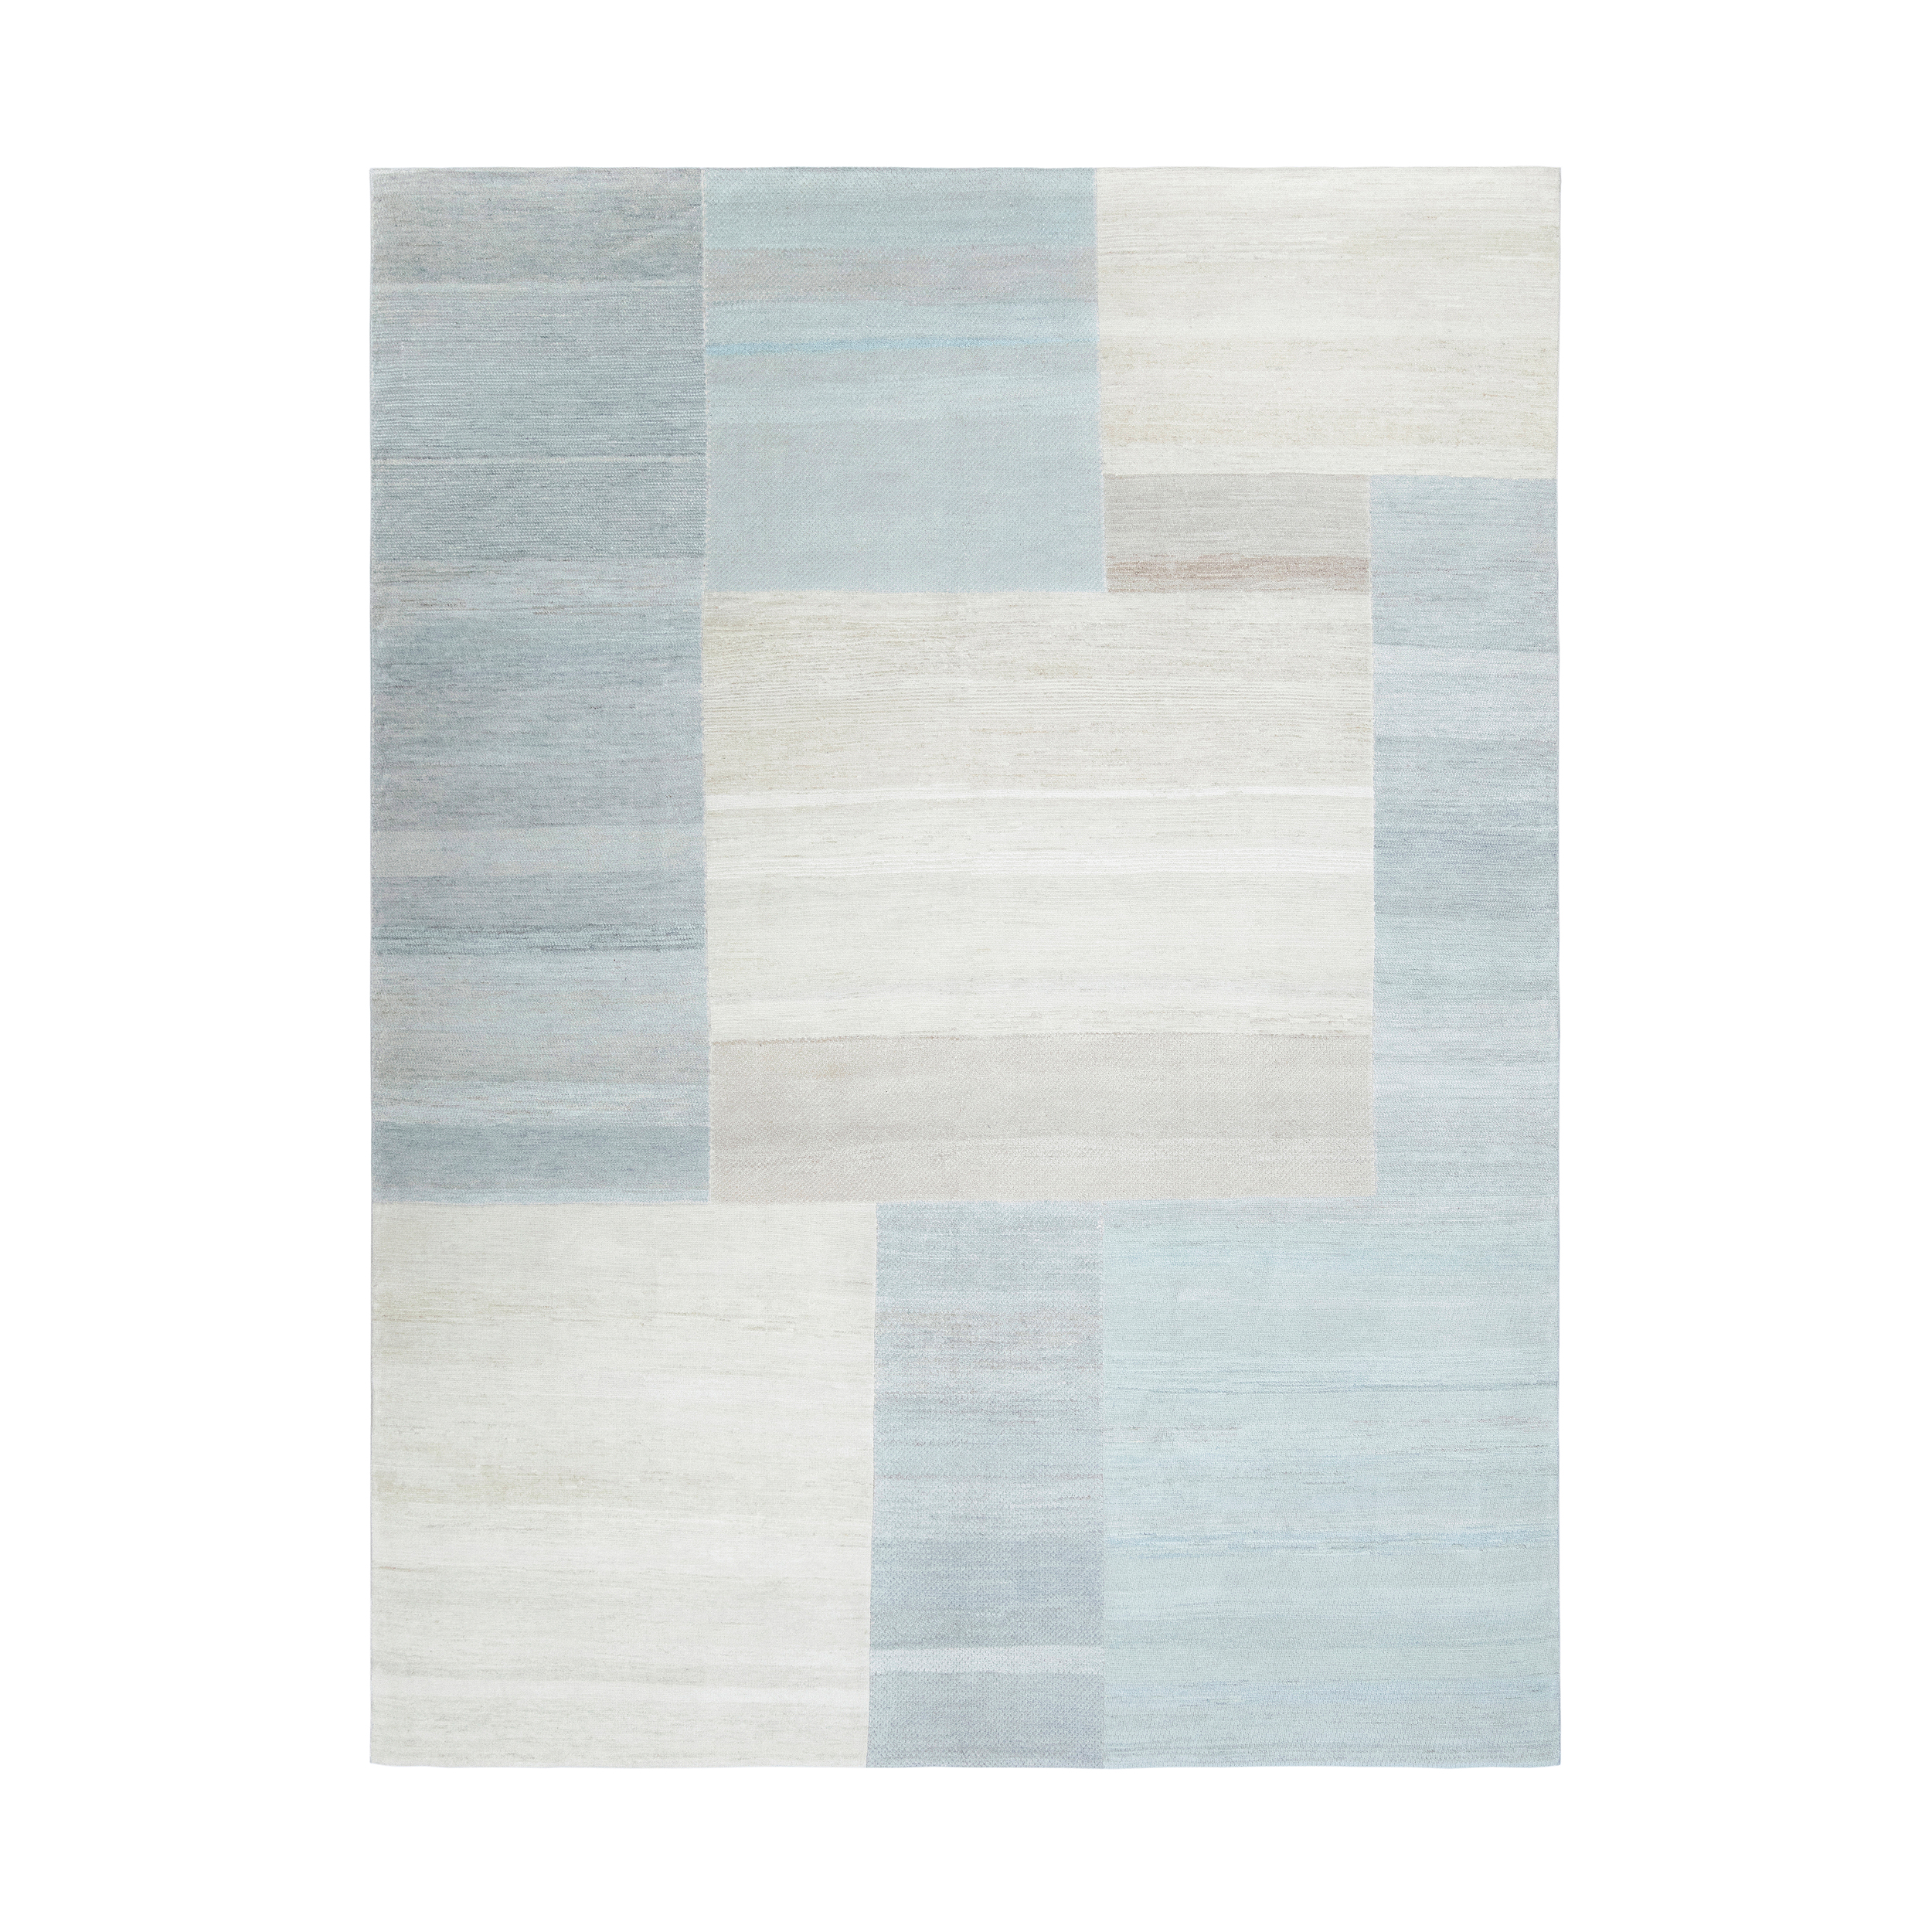 Chalten II rug is a finely hand-knotted piece, made from Persian hand-spun wool with four different textures. 